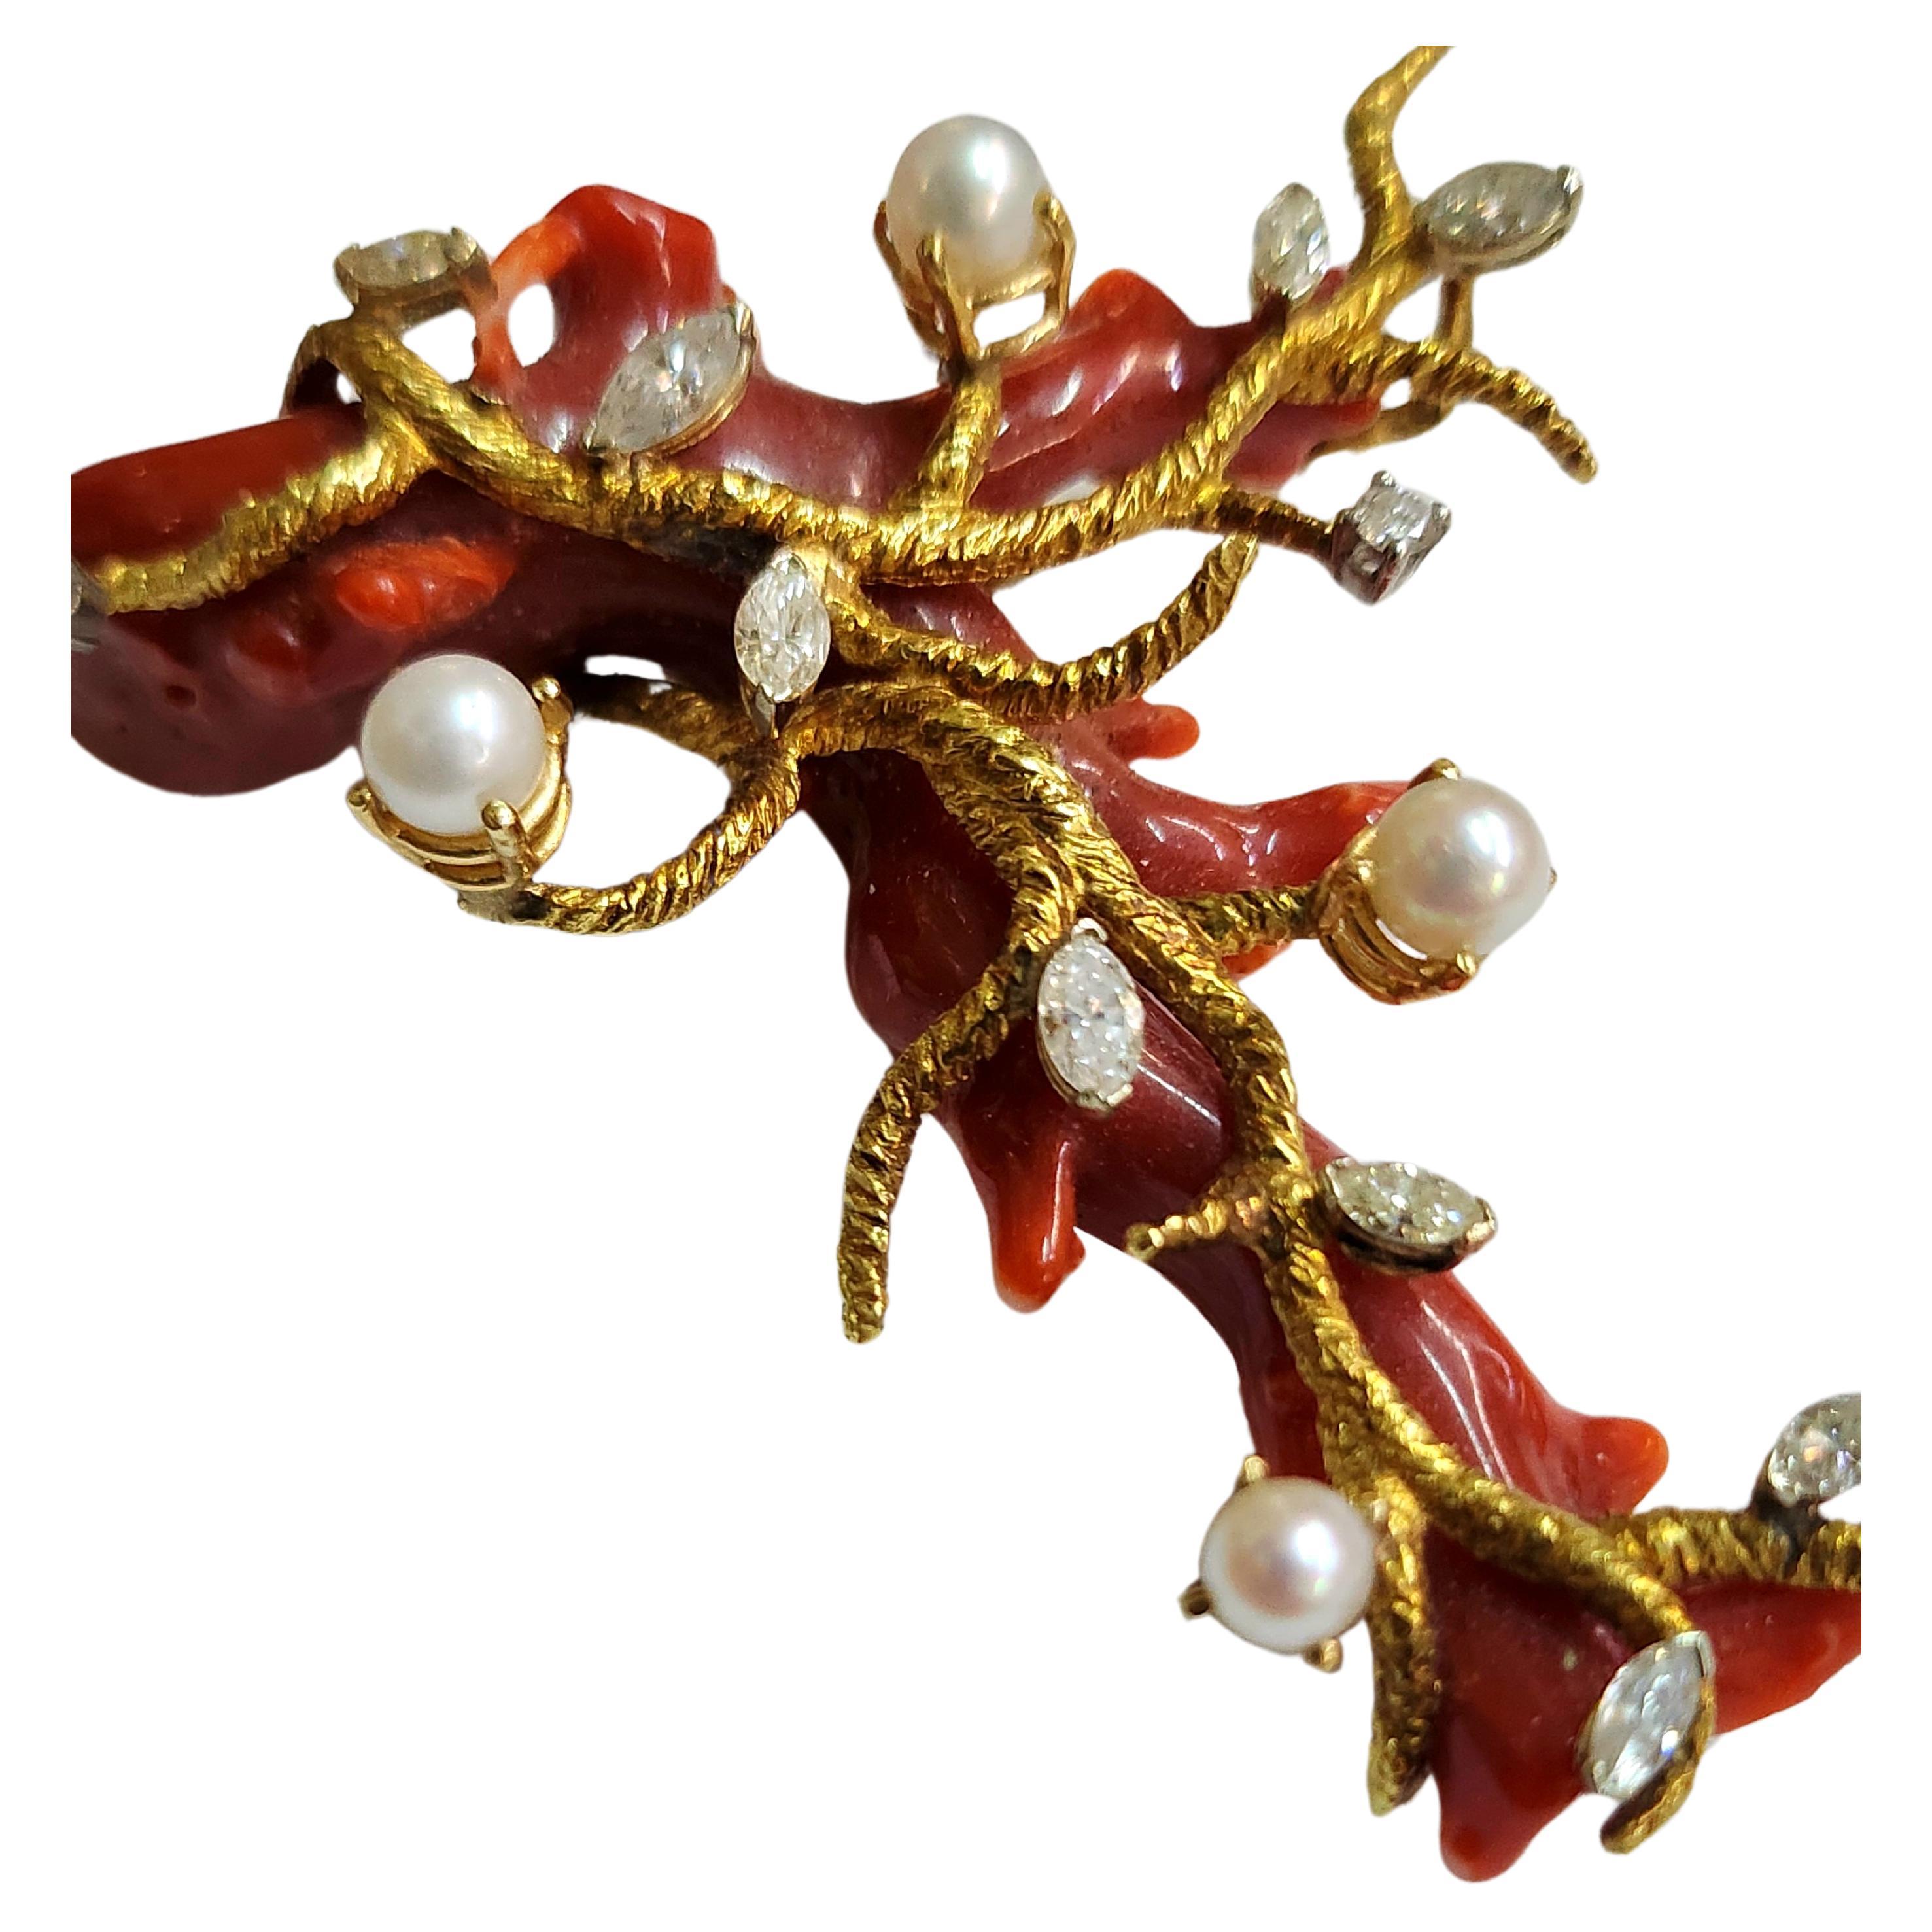 Vintage very large massive piece of natural red coral 40 grams weight 10cm lenght topped with 18k yellow gold and 2.5 carats brilliant marques cut diamonds and white sea pearls 